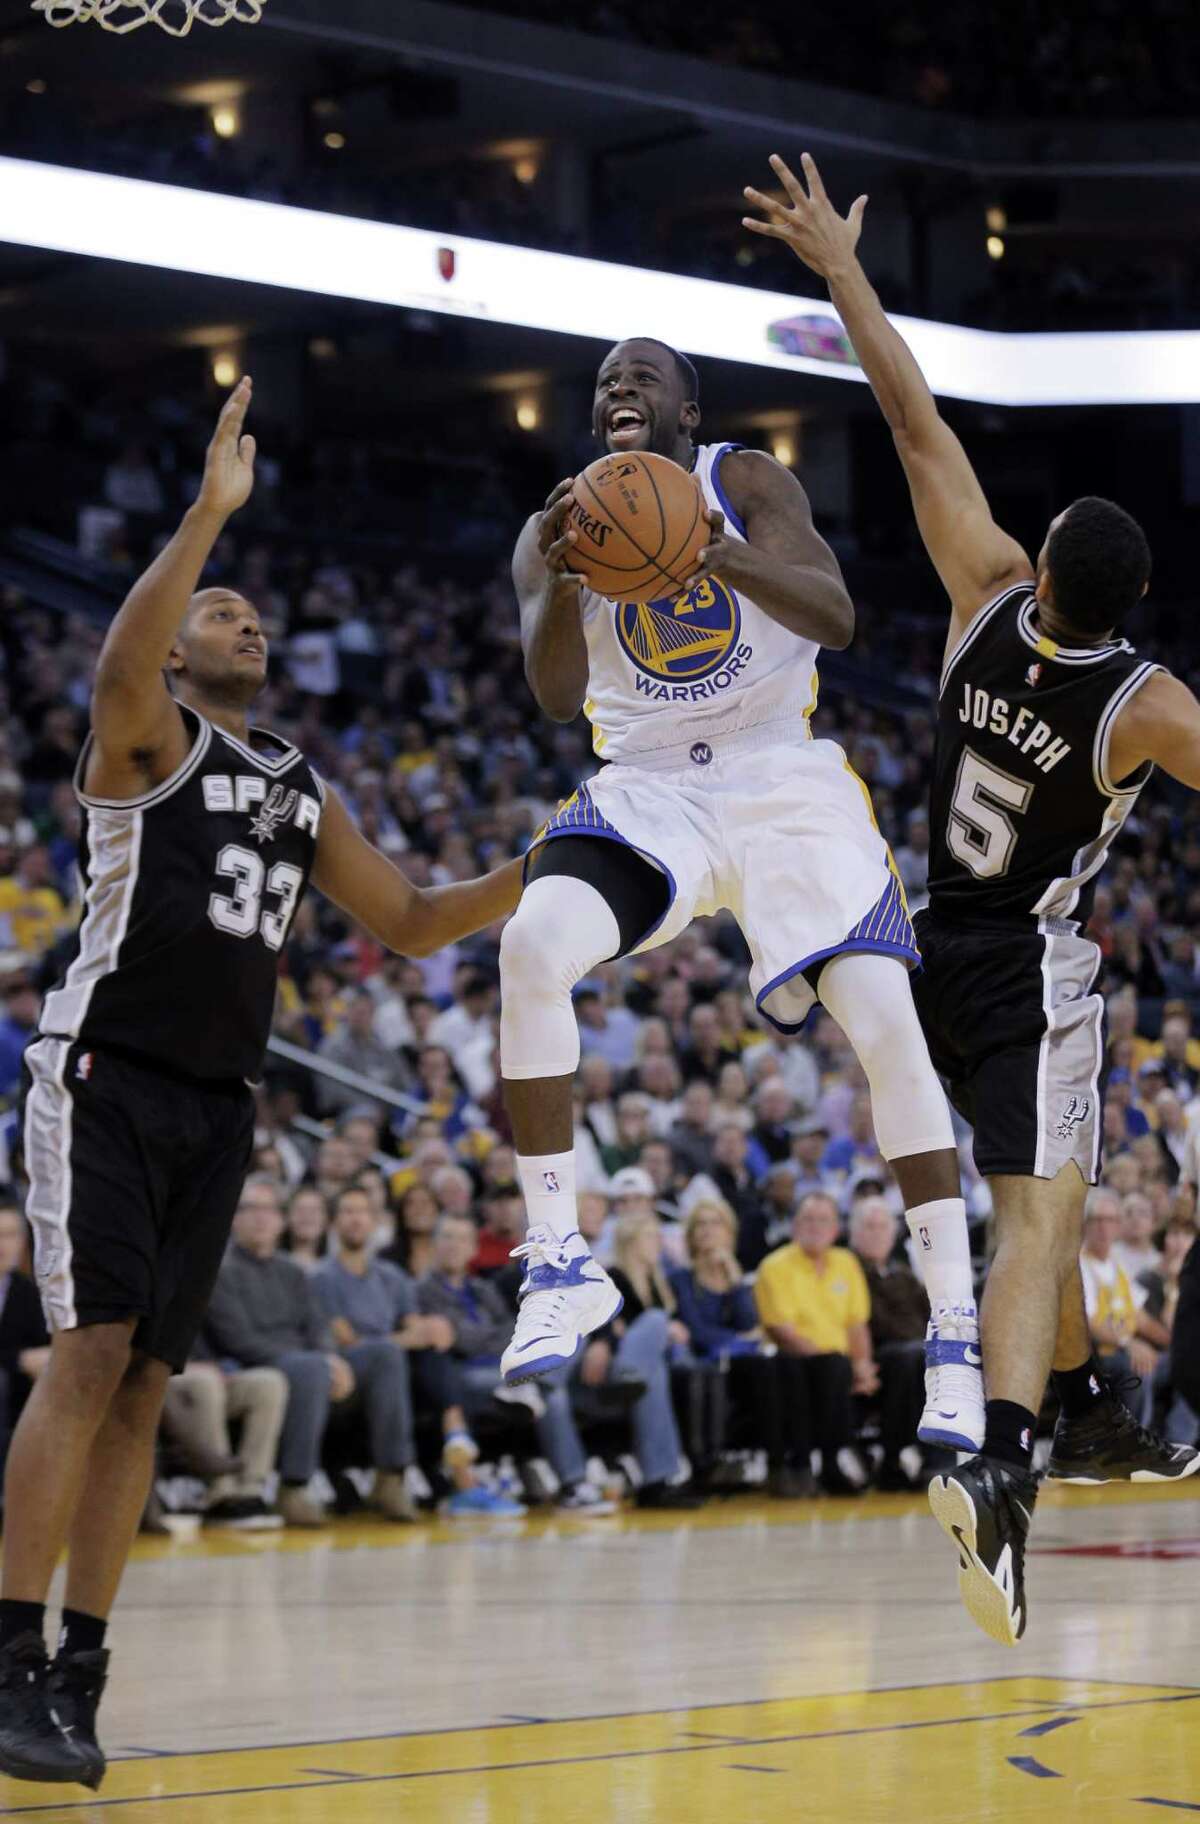 Draymond Green (23) drives to the basket in the first half. The Golden State Warriors played the San Antonio Spurs at Oracle Arena in Oakland, Calif., on Tuesday, November 11, 2014.